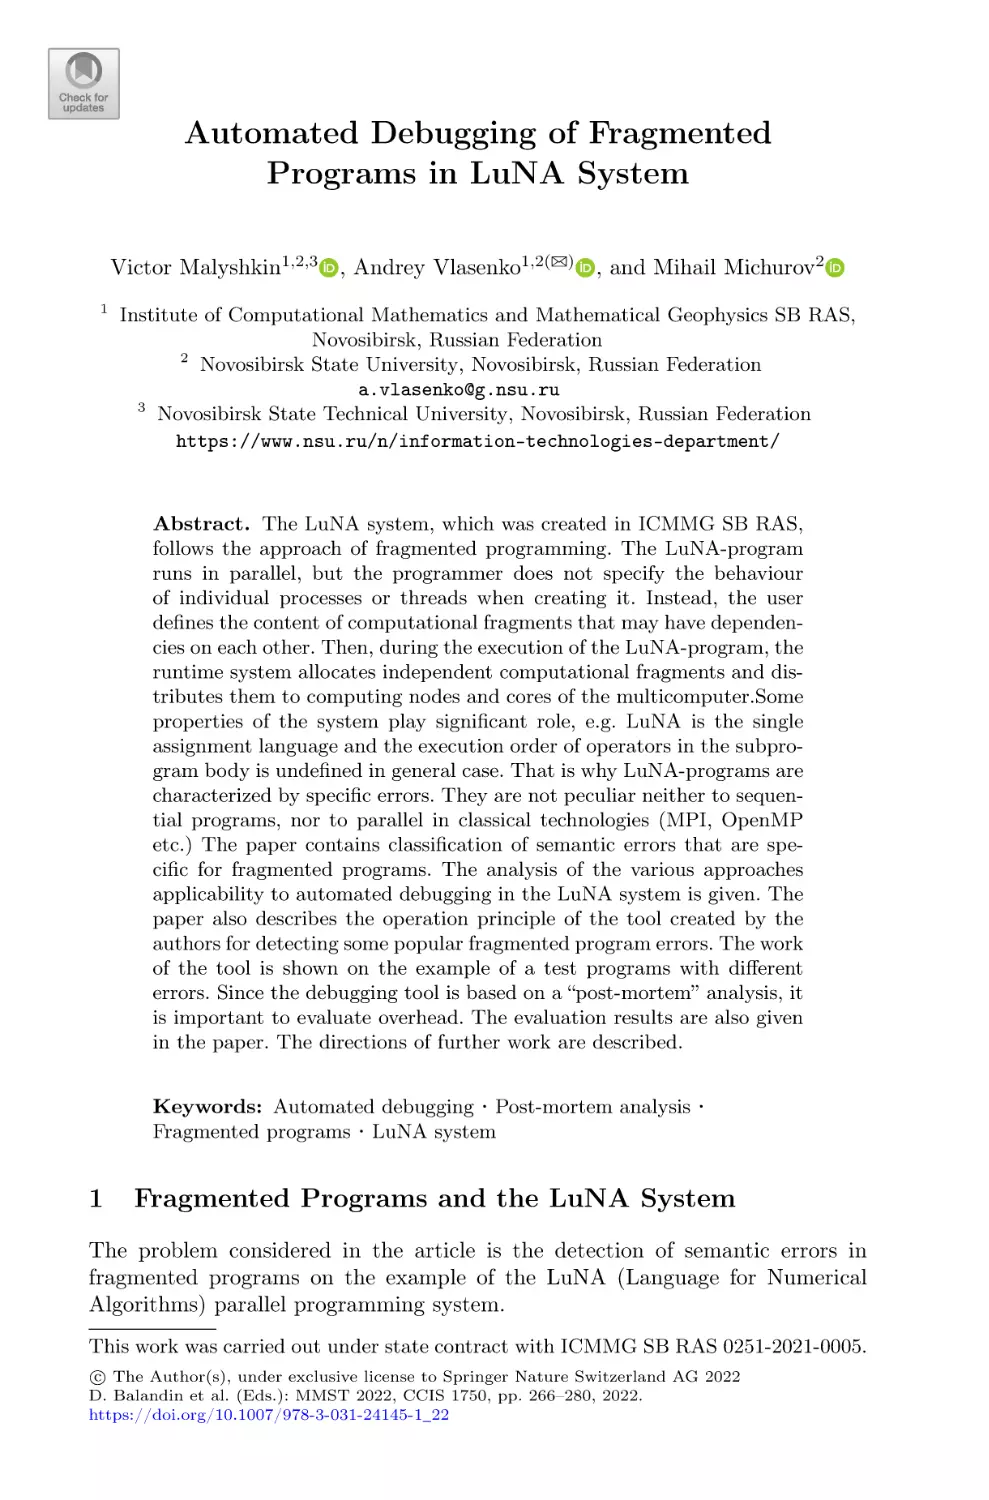 Automated Debugging of Fragmented Programs in LuNA System
1 Fragmented Programs and the LuNA System